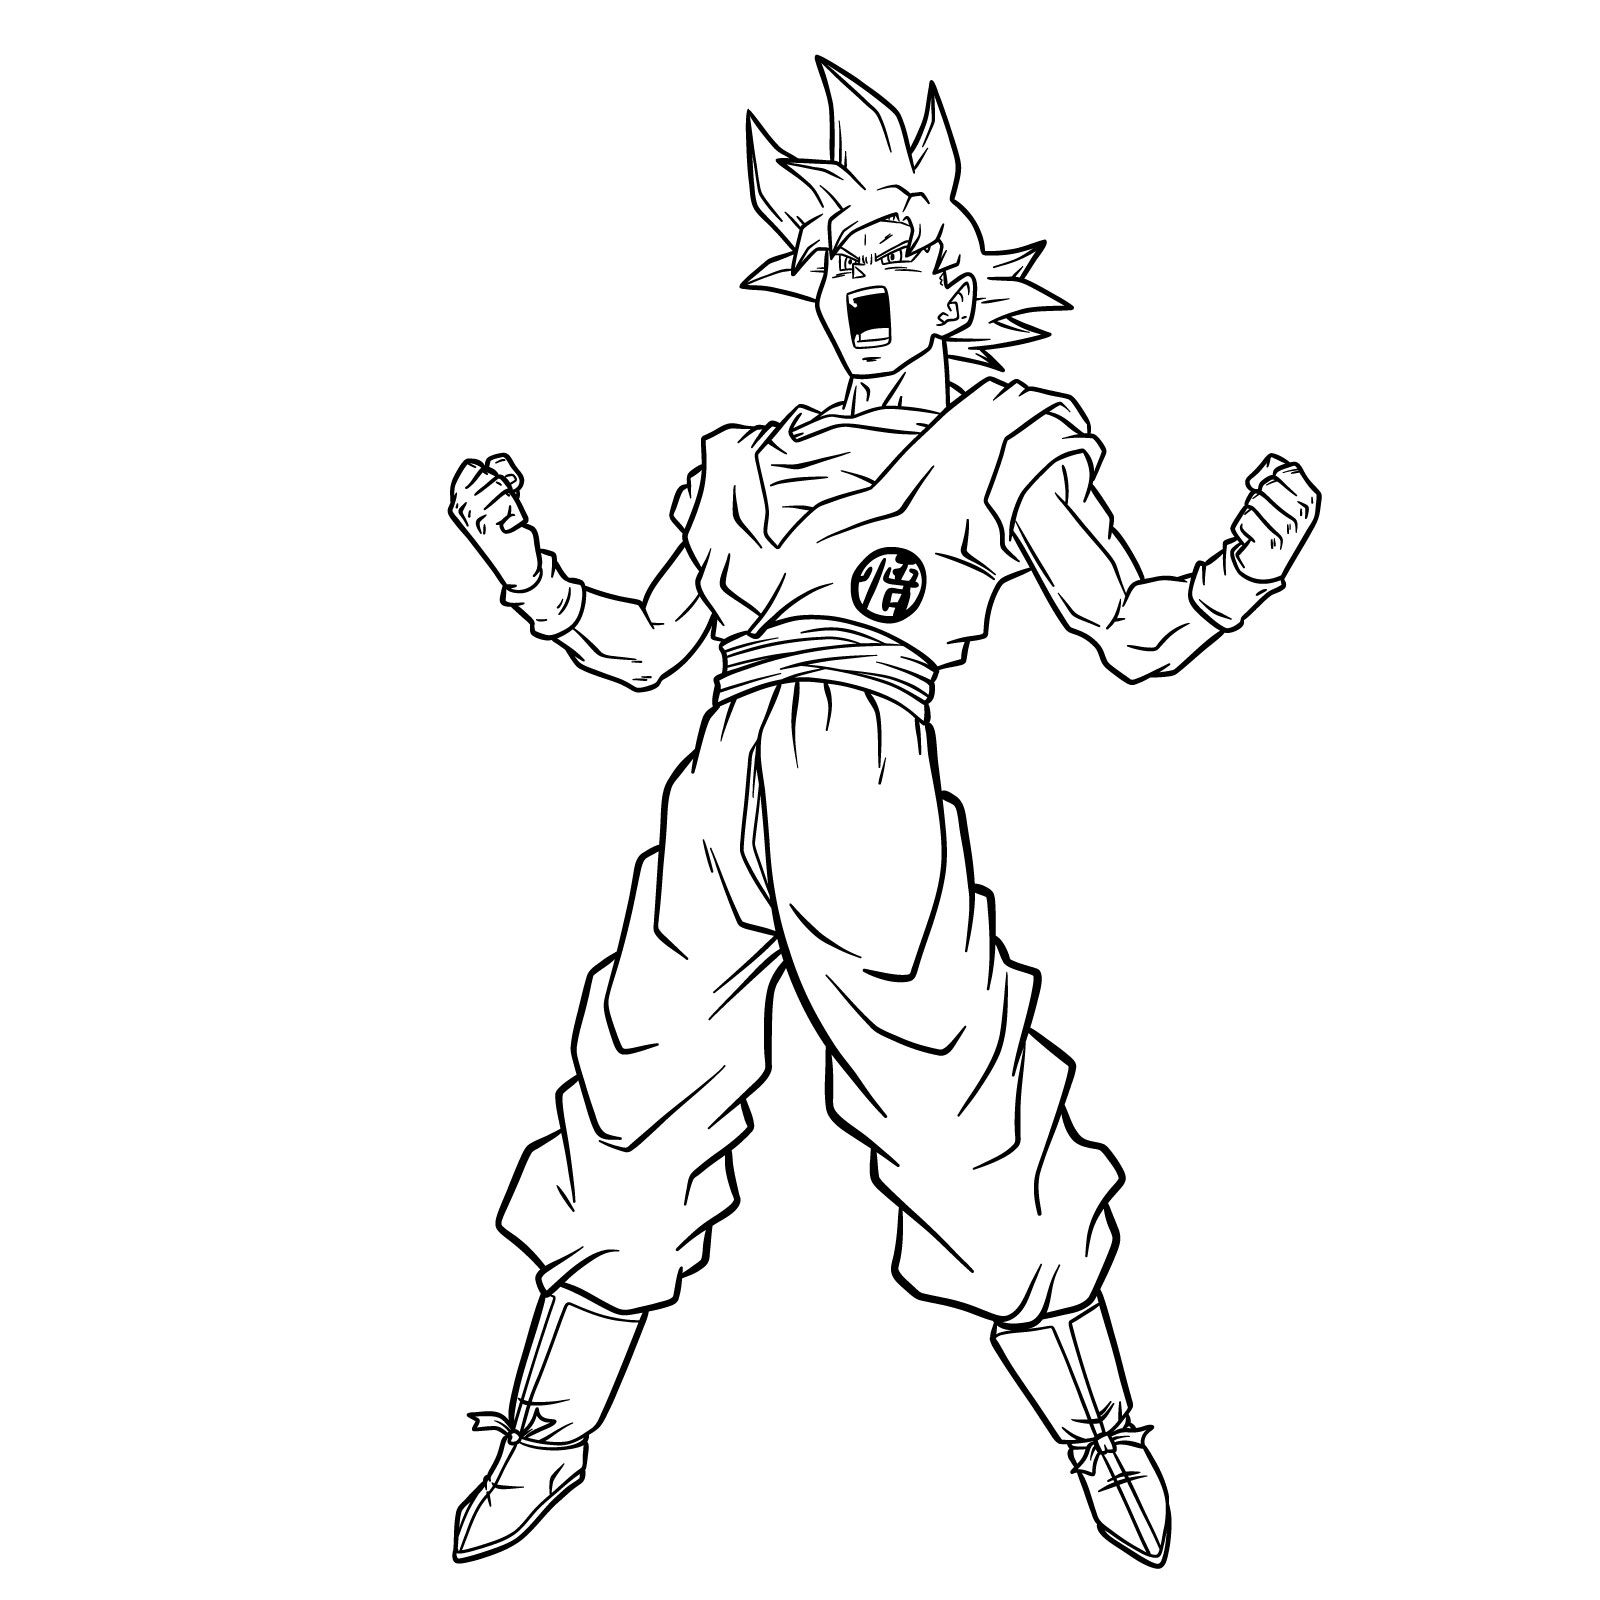 How to Draw Goku in Super Saiyan God 2: A Complete Guide - Sketchok ...